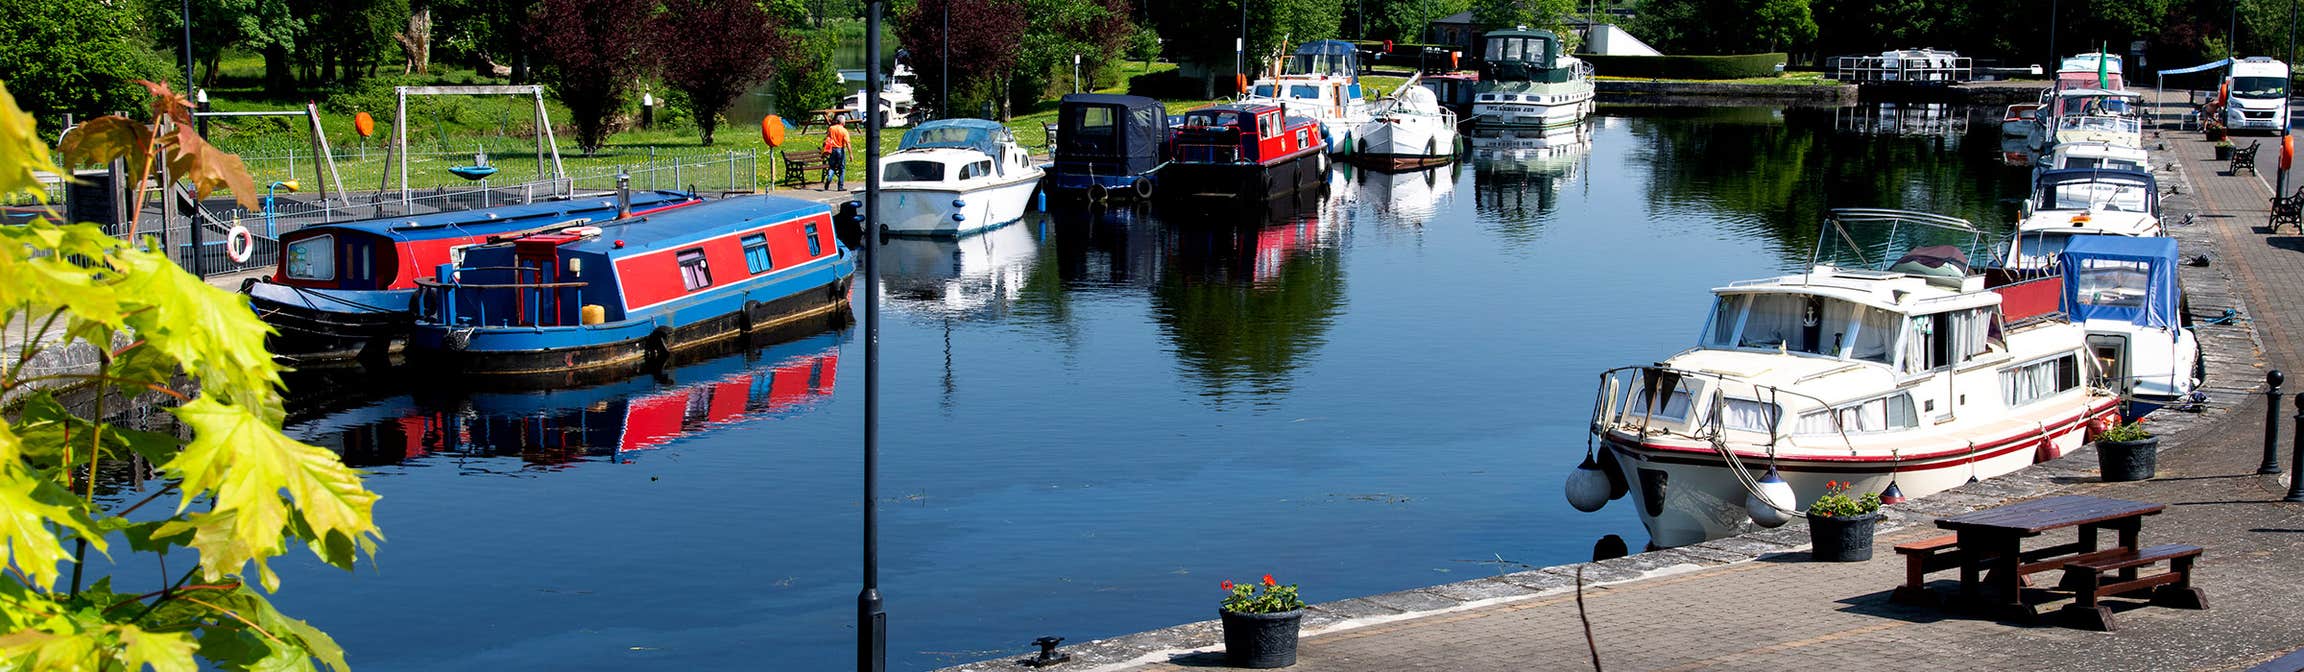 Colourful boats docked in Clondra harbour in Longford